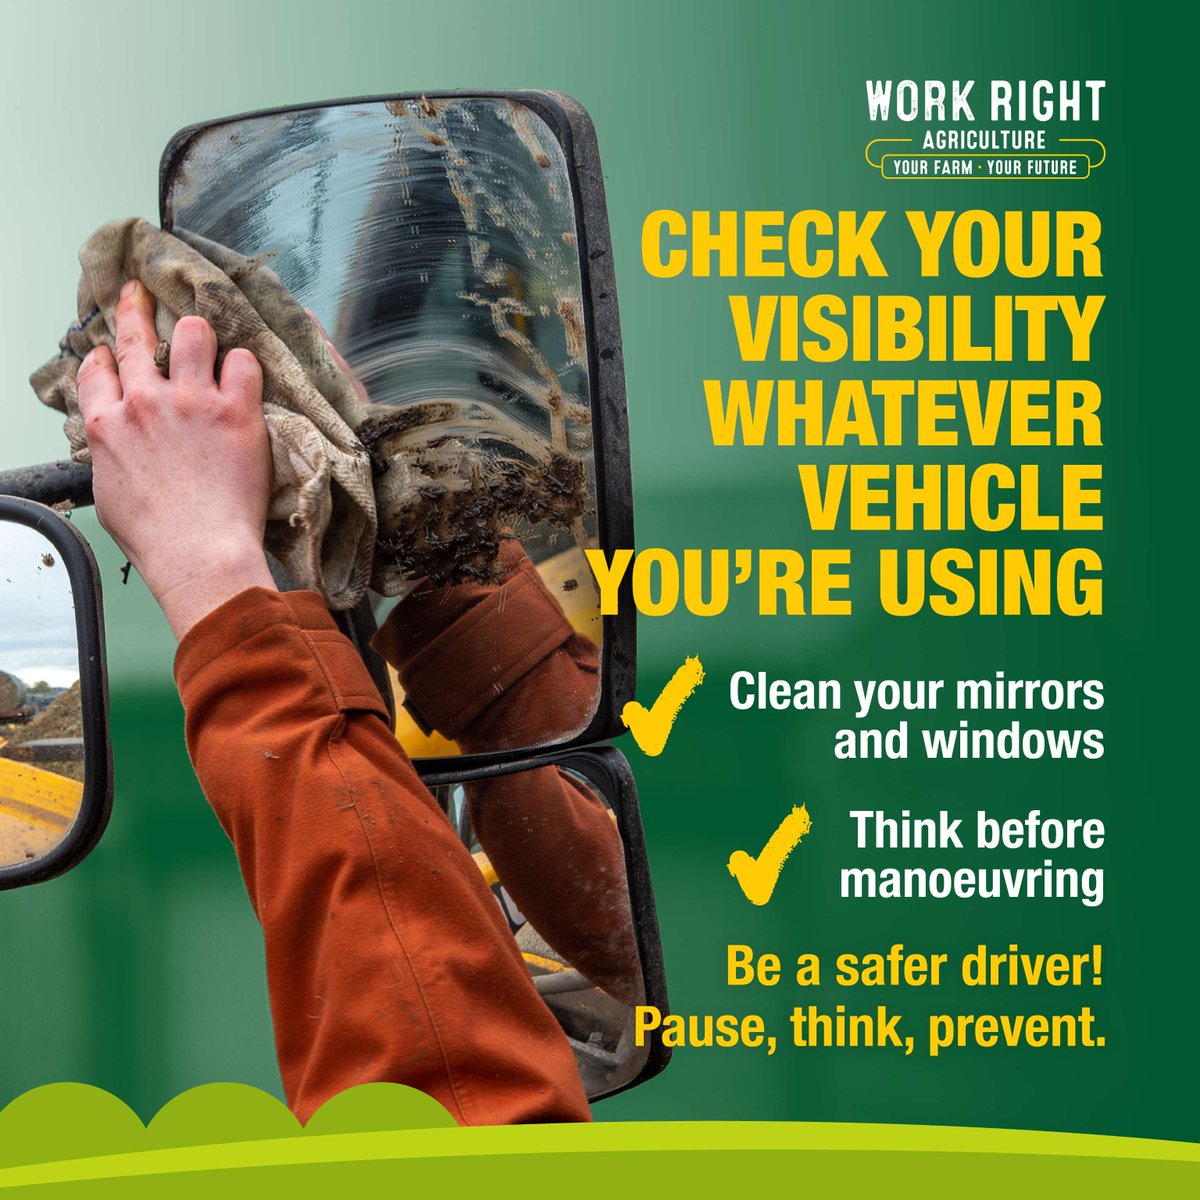 Prevent deaths and injuries on your farm. Whatever vehicle you're using, check your visibility. Download our free checklist: workright.campaign.gov.uk/download/7317/… #WorkRightAgriculture #FarmSafety #Agriculture